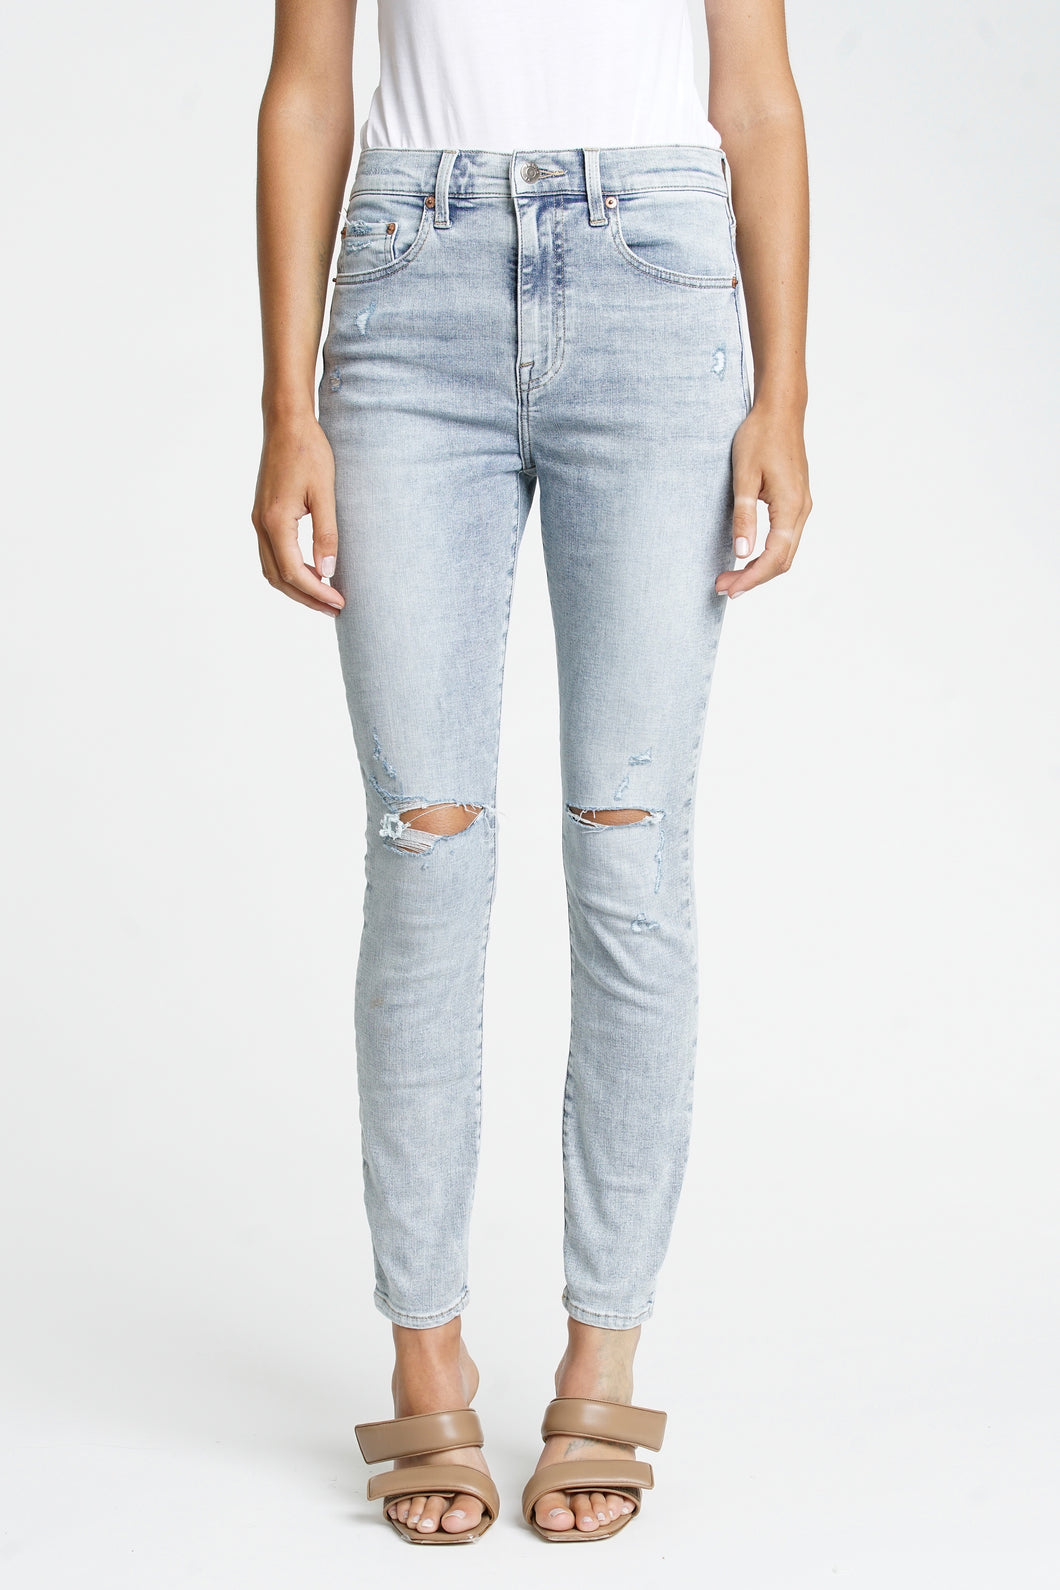 Pistola Audrey Mid Rise Skinny in Lush - FINAL SALE